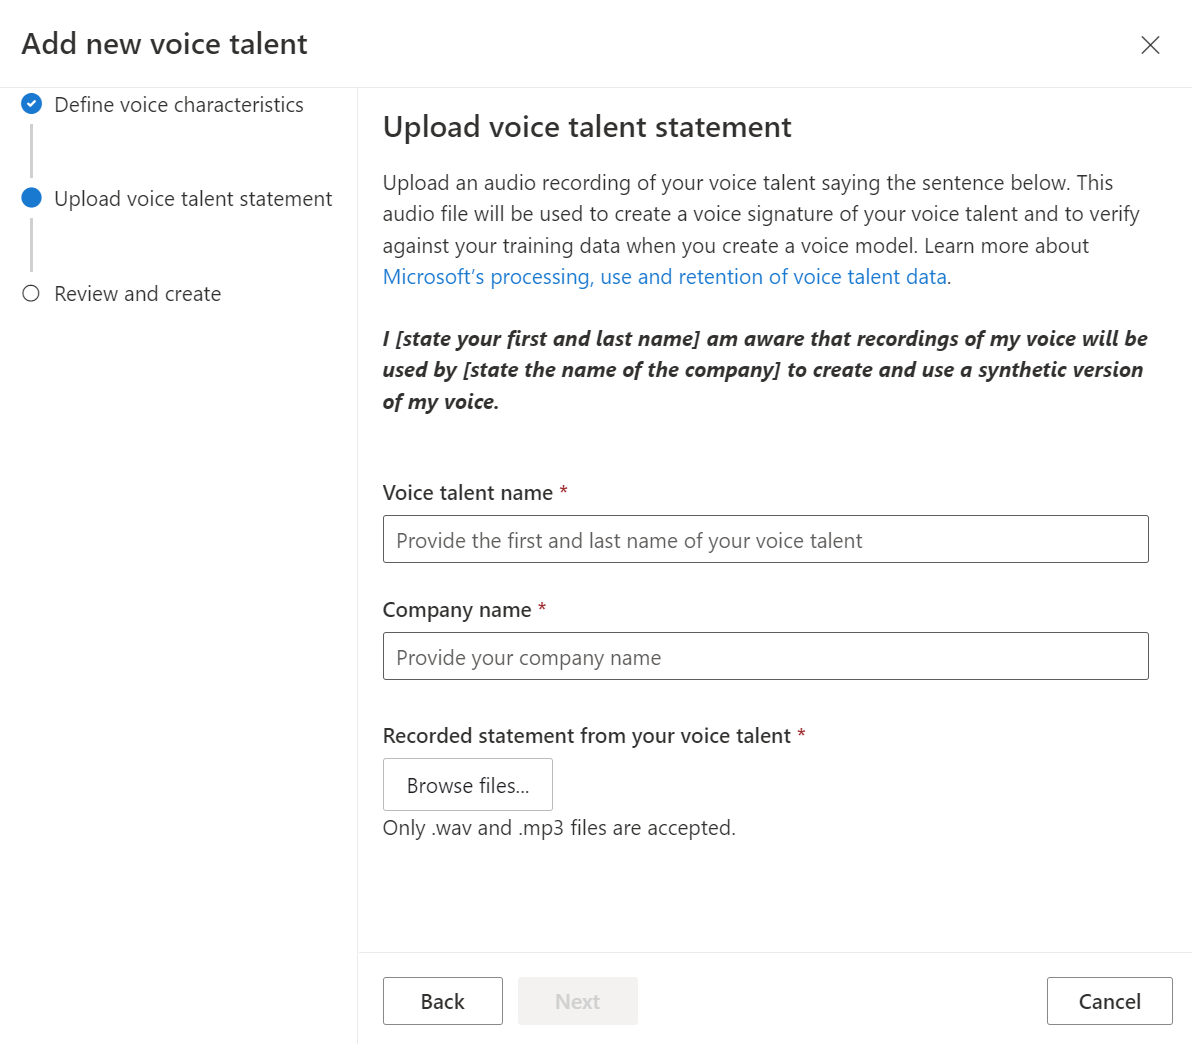 Screenshot of the voice talent statement upload dialog.